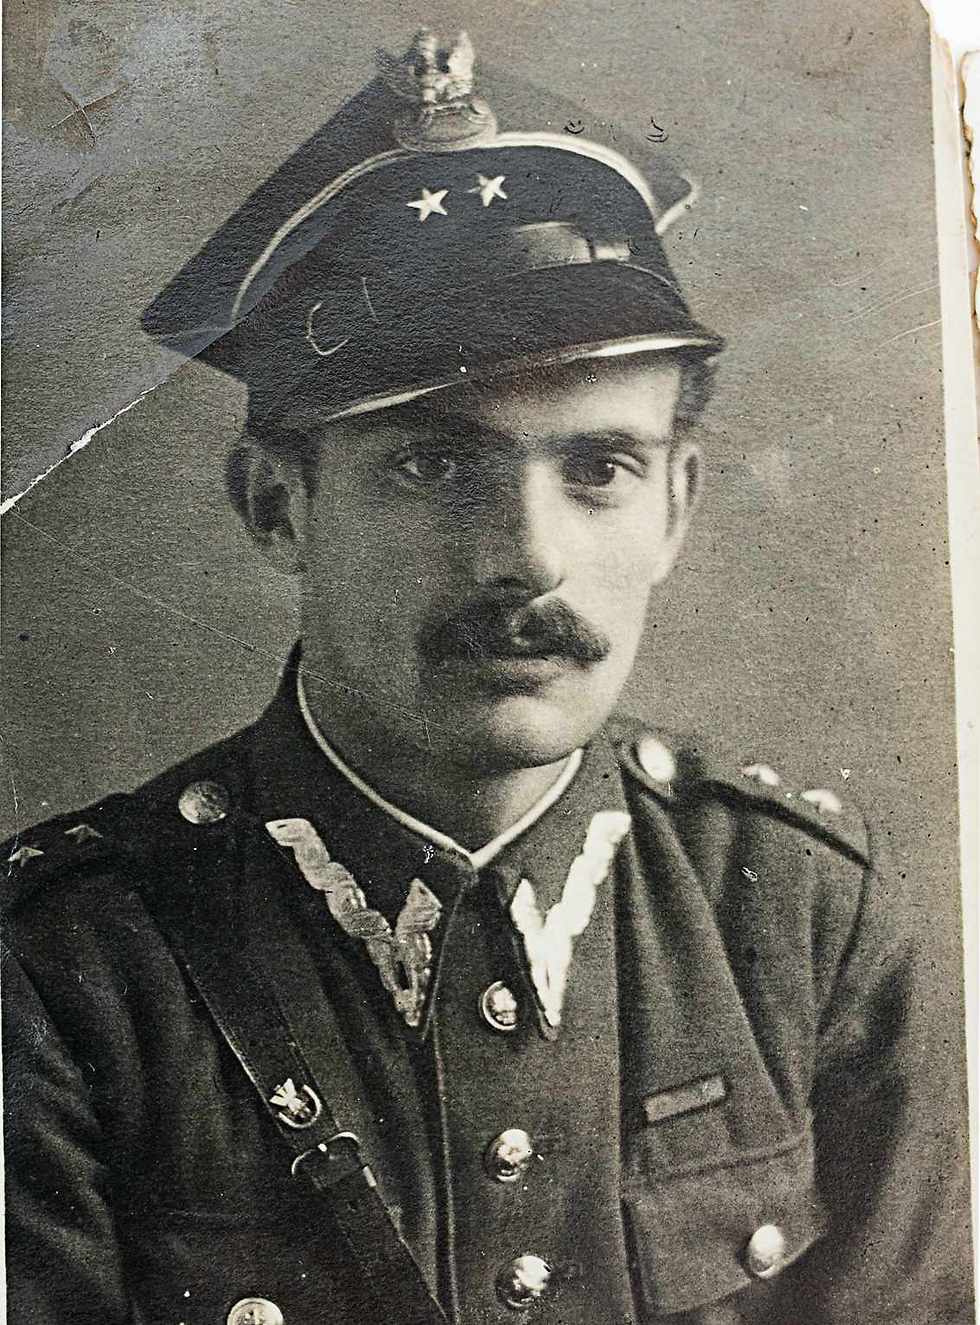 The young Samuel Willenberg as an officer in the Polish army.